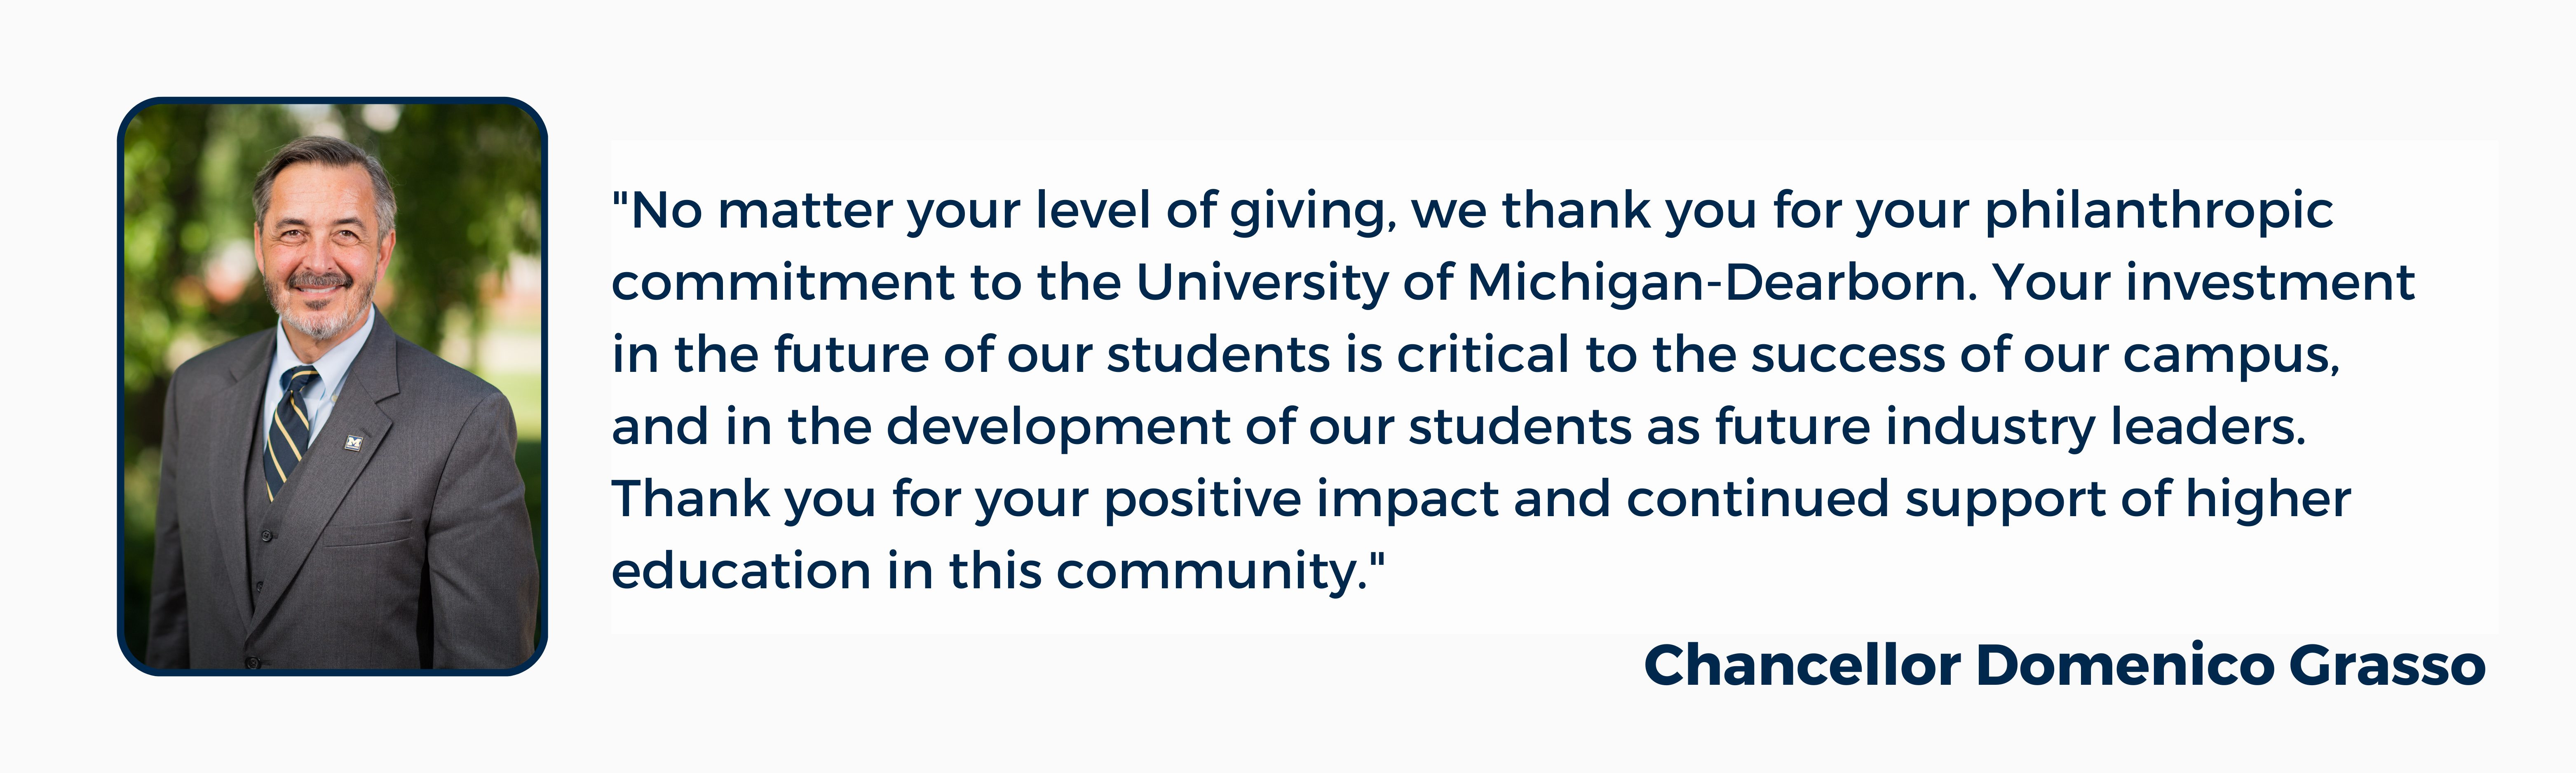 "No matter your level of giving, we thank you for your philanthropic commitment to the University of Michigan-Dearborn. Your investment in the future of our students is critical to the success of our campus, and in the development of our students as future industry leaders. Thank you for your positive impact and continued support of higher education in this community."